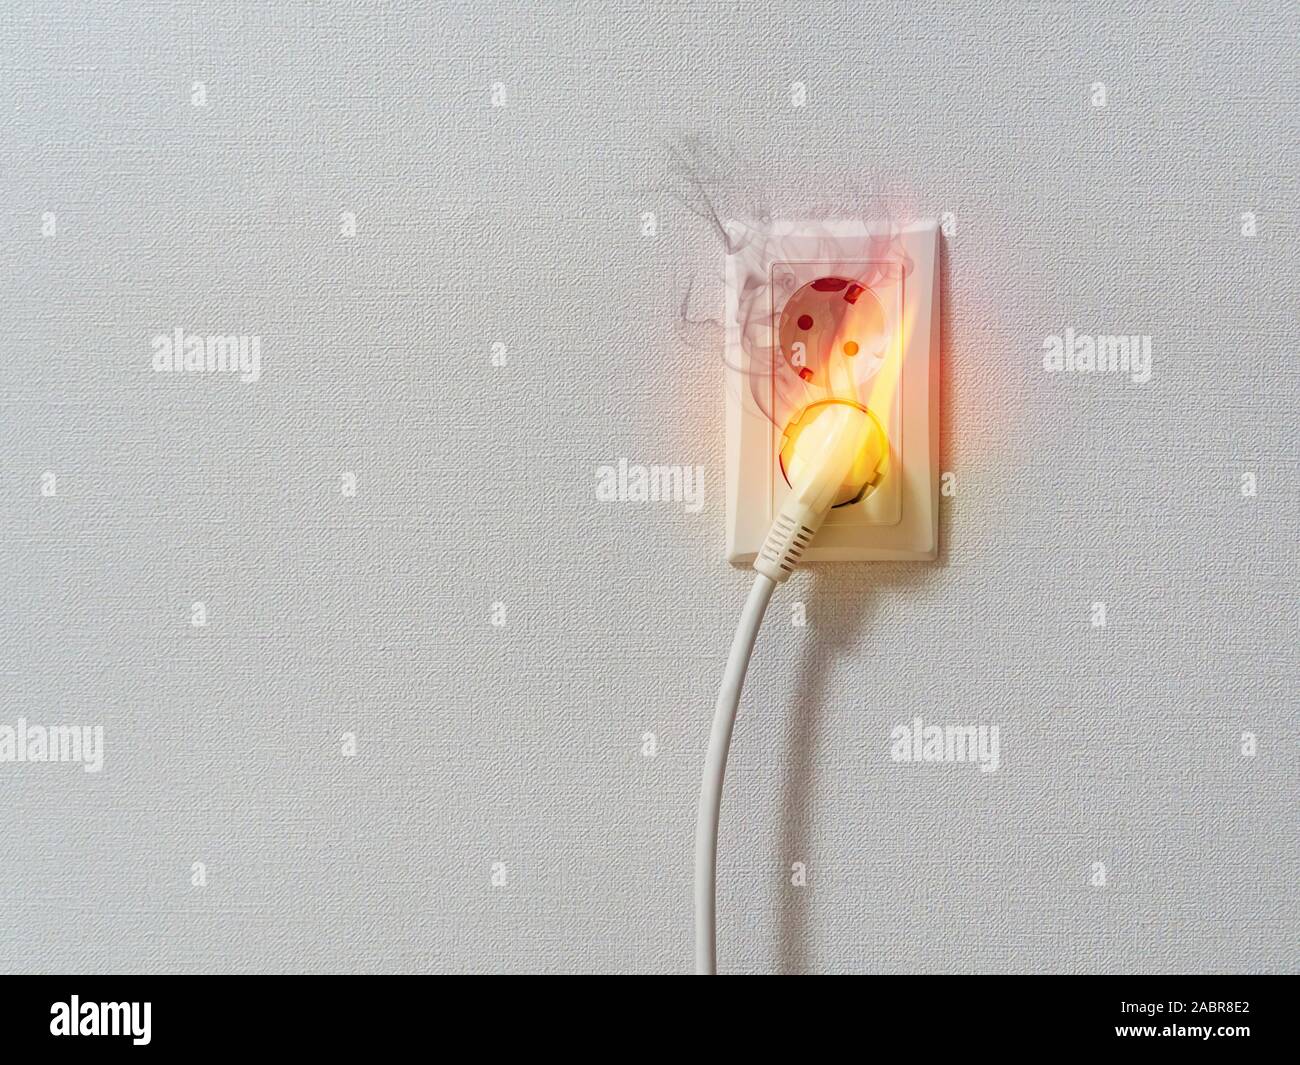 Electric short circuit causing fire on plug socket. Fire and smoke on electric wire plug. Stock Photo